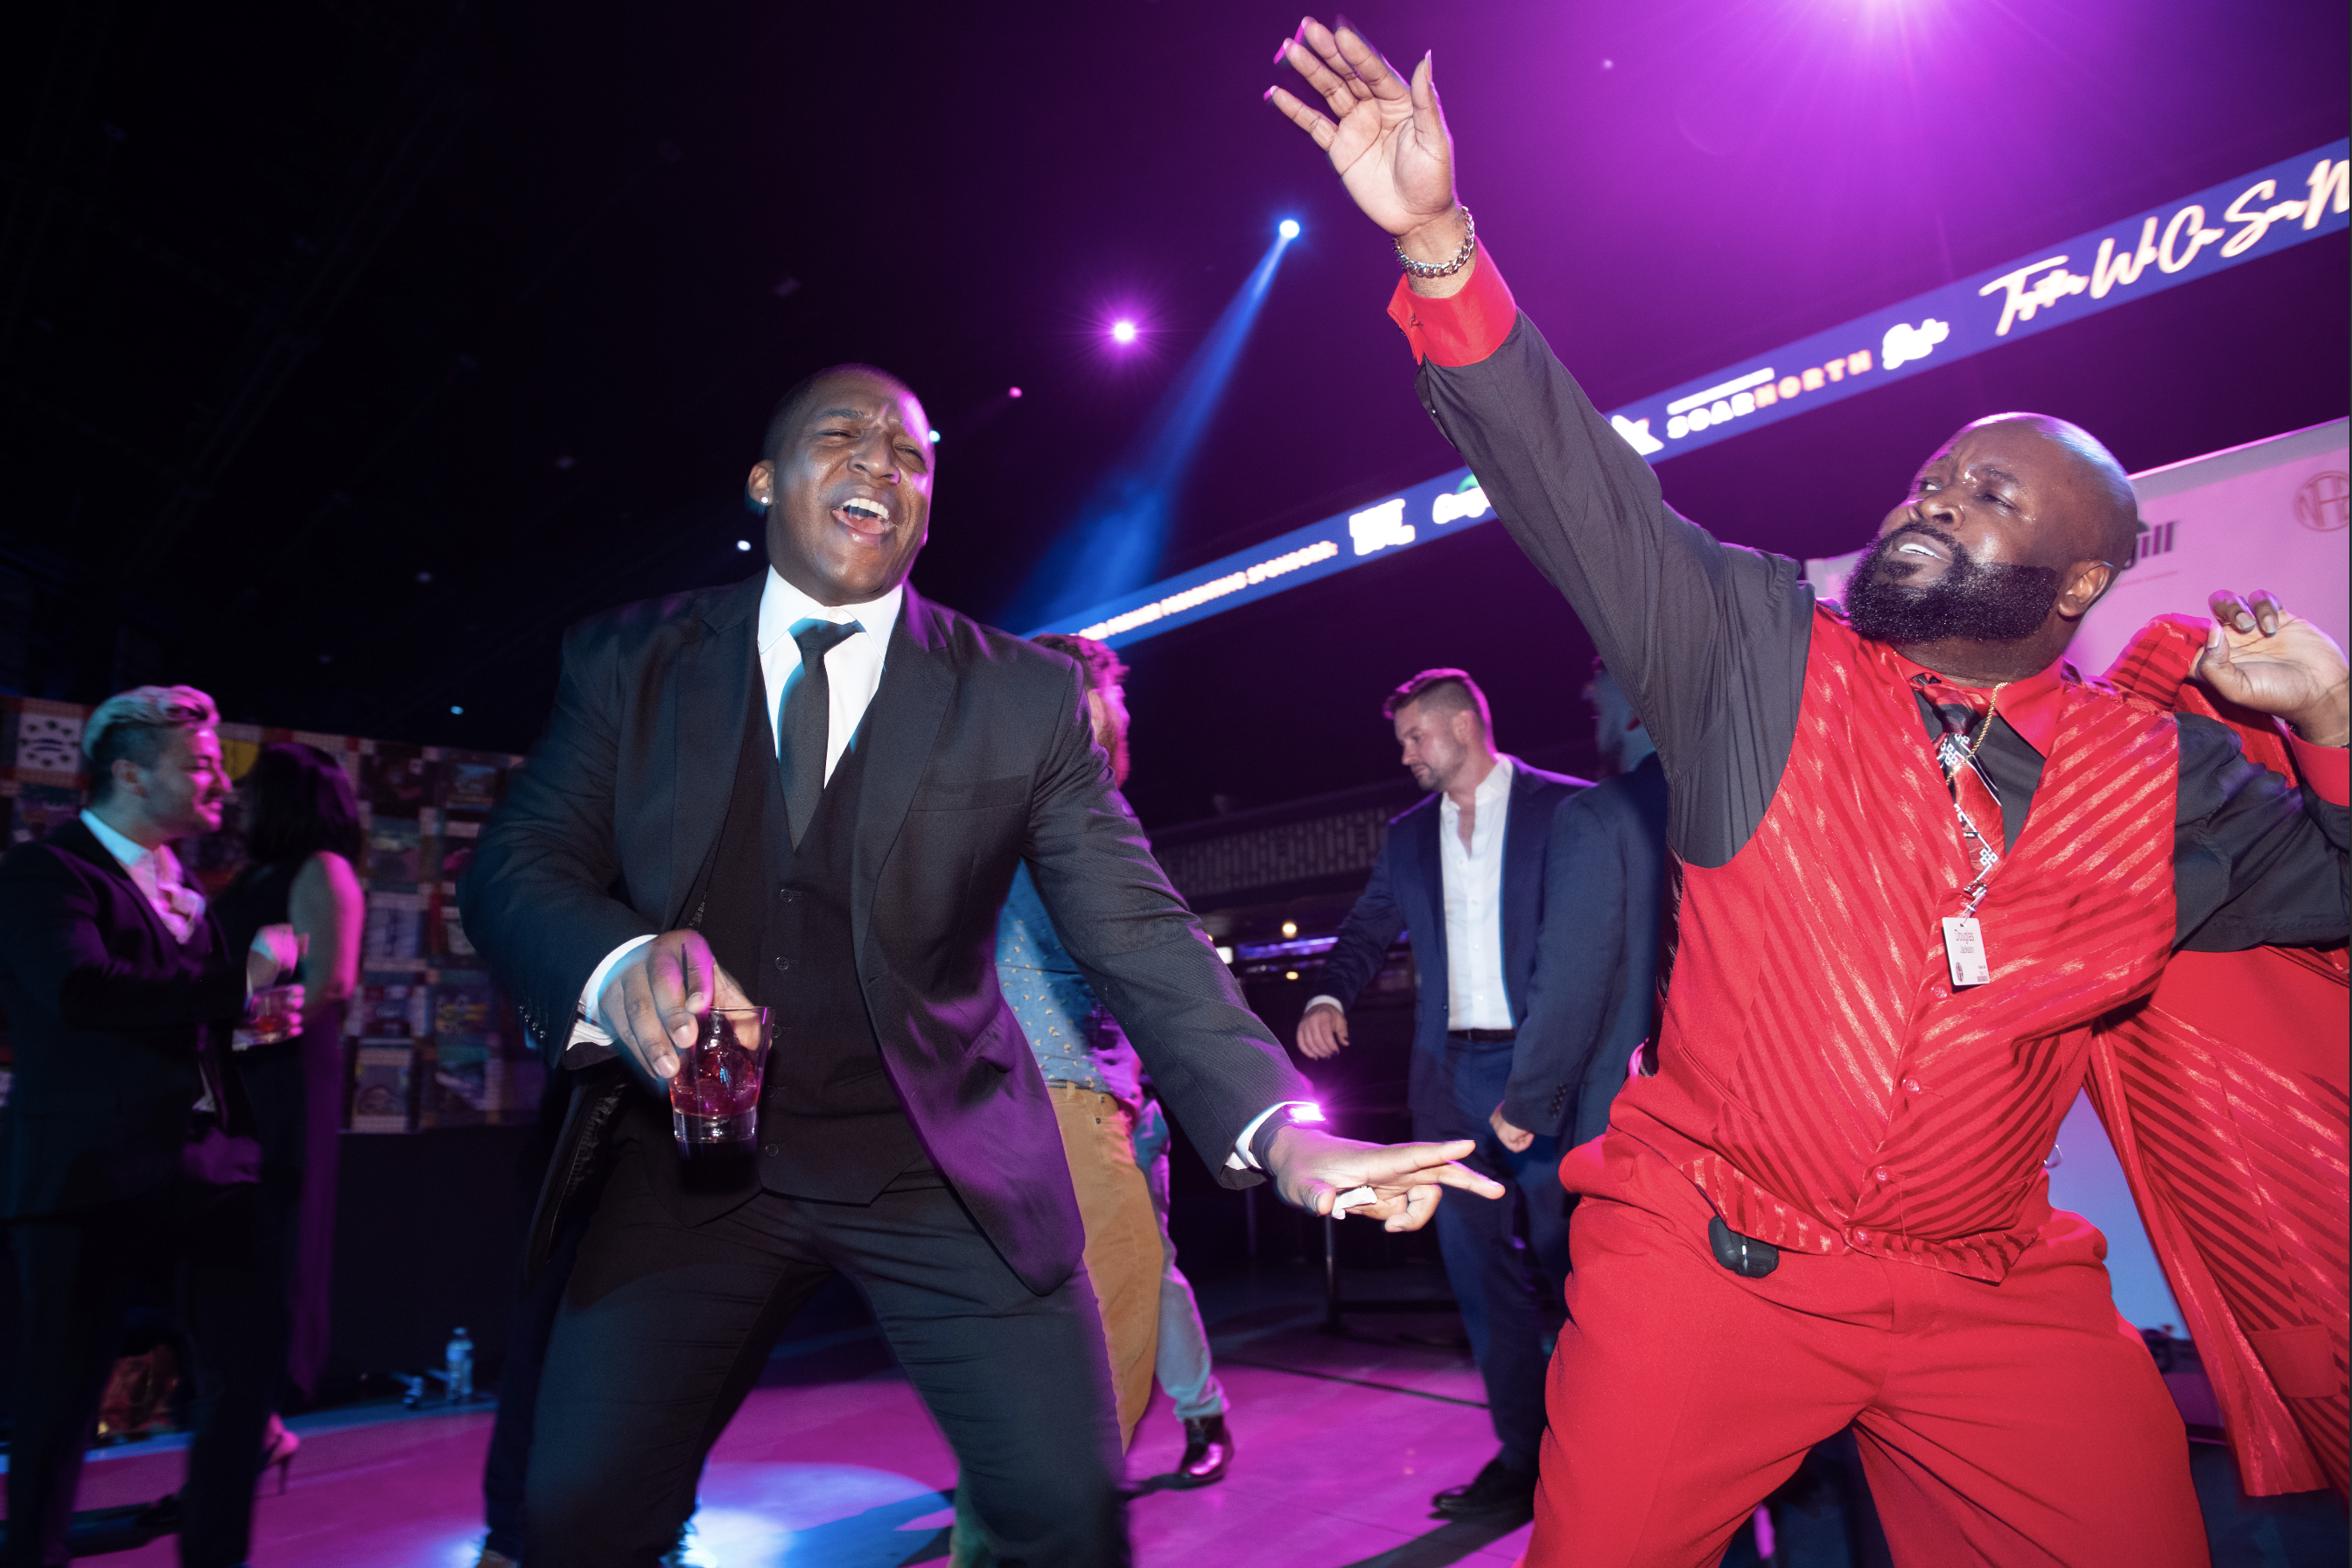 Two men dance at the after party, both are wearing suits and having a good time.